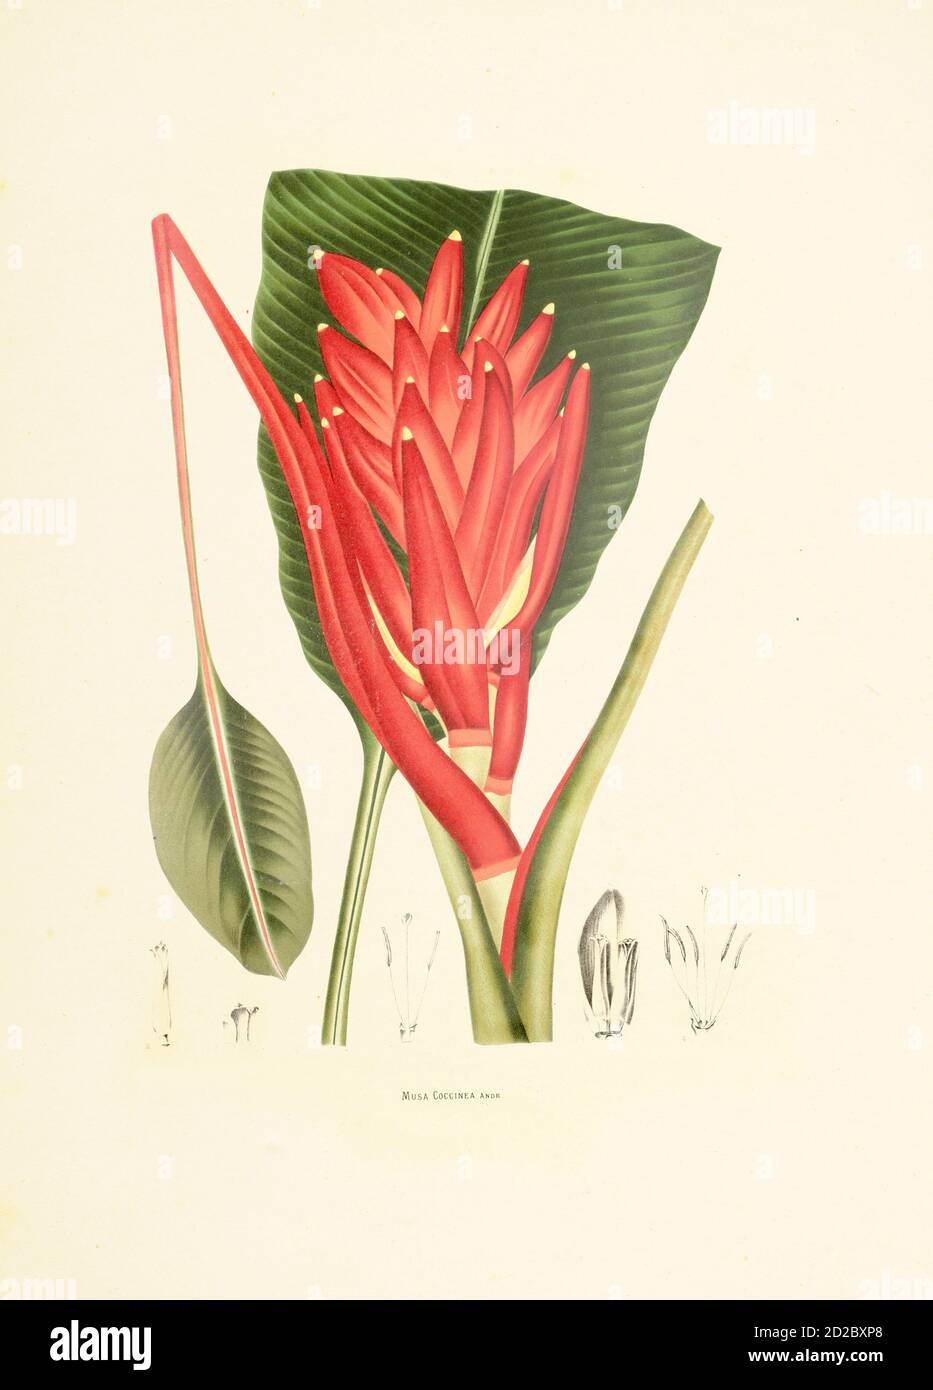 Antique illustration of a musa coccinea (also known as scarlet banana or red-flowering banana). Engraving by Berthe Hoola van Nooten from the book Fle Stock Photo